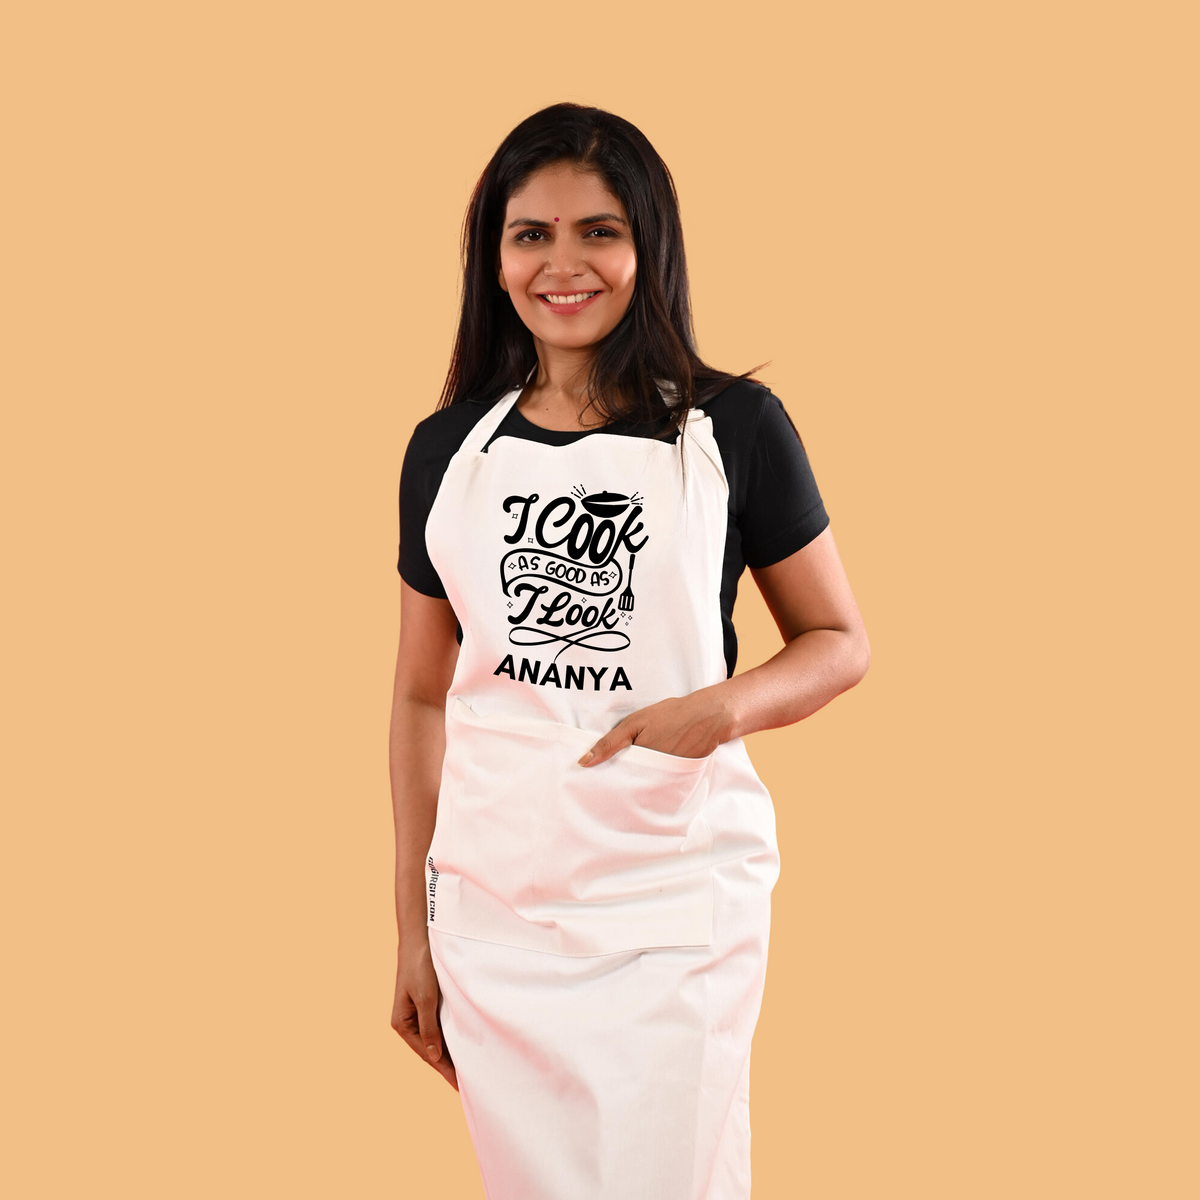 I-Cook-As-Good-As-I-Look-Personalised-Cotton-Apron-Front-Main-Gogirgit